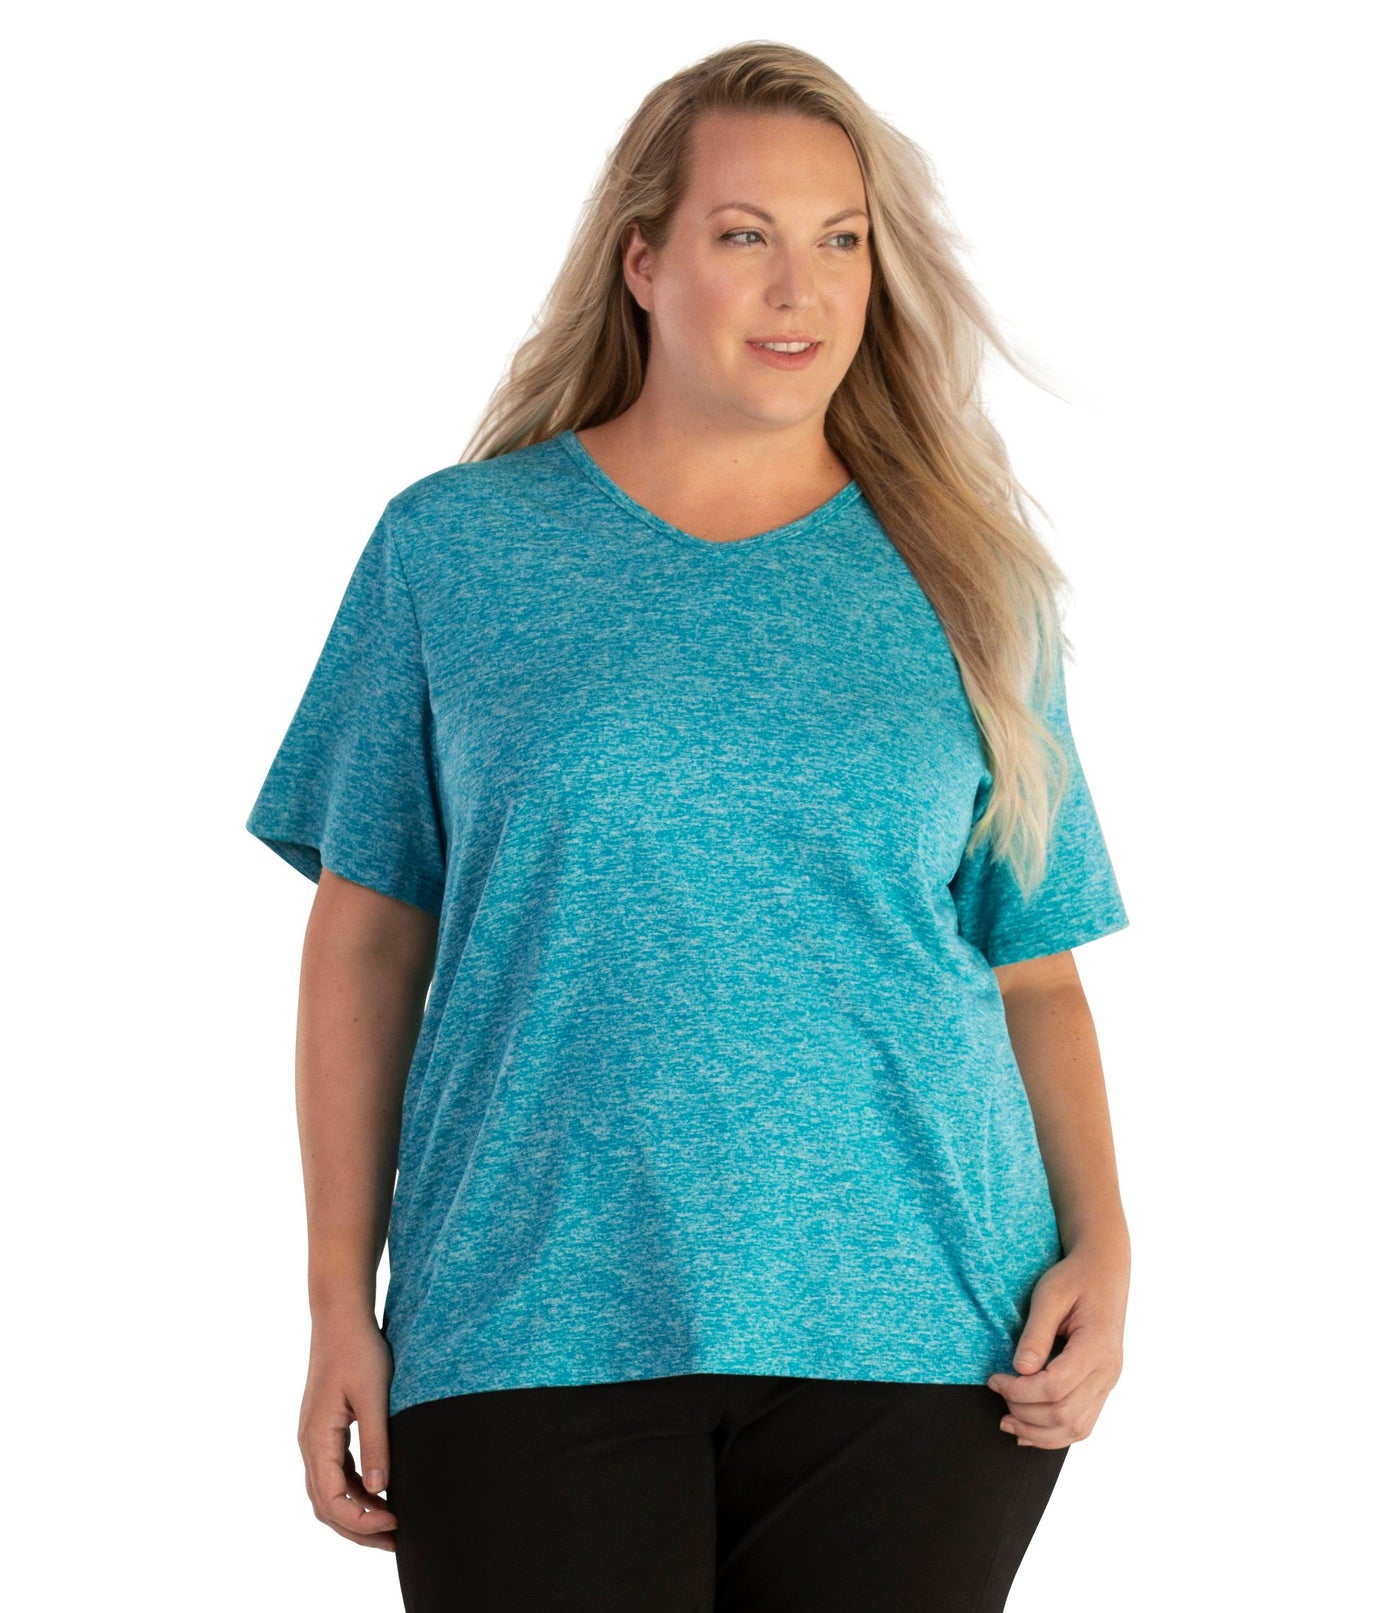 Plus size woman, facing front, wearing JunoActive plus size SoftWik V-Neck Tee in the color Ocean Blue. She is wearing JunoActive Plus Size Leggings in the color Black.